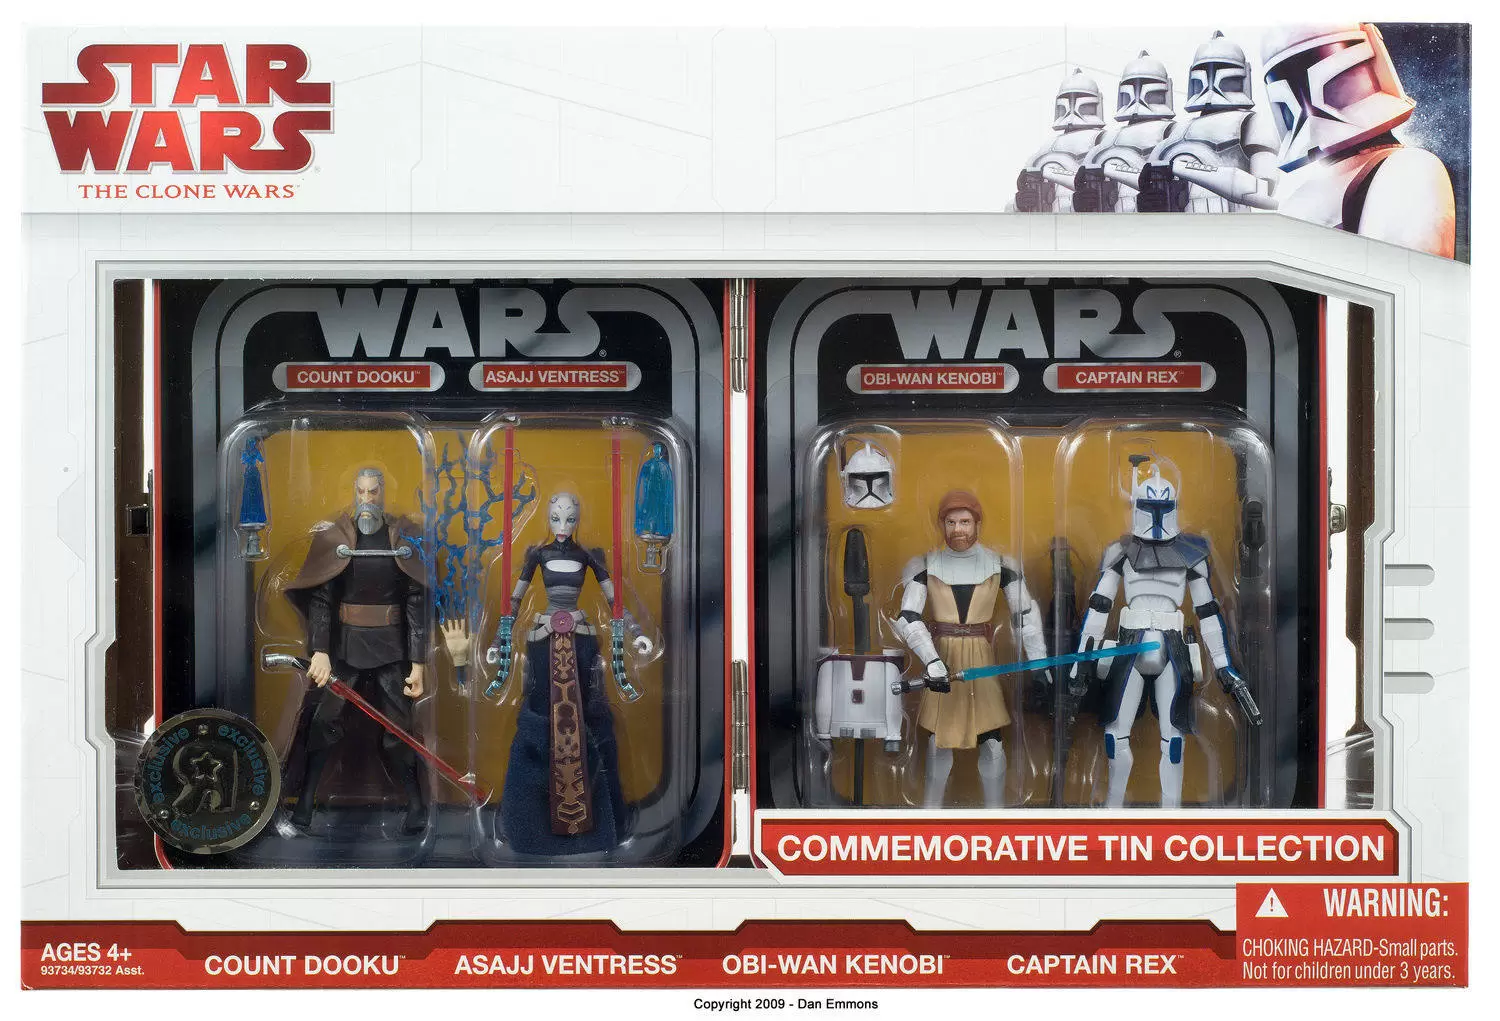 The Clone Wars (TCW 2009) - Commemorative Tin Collection